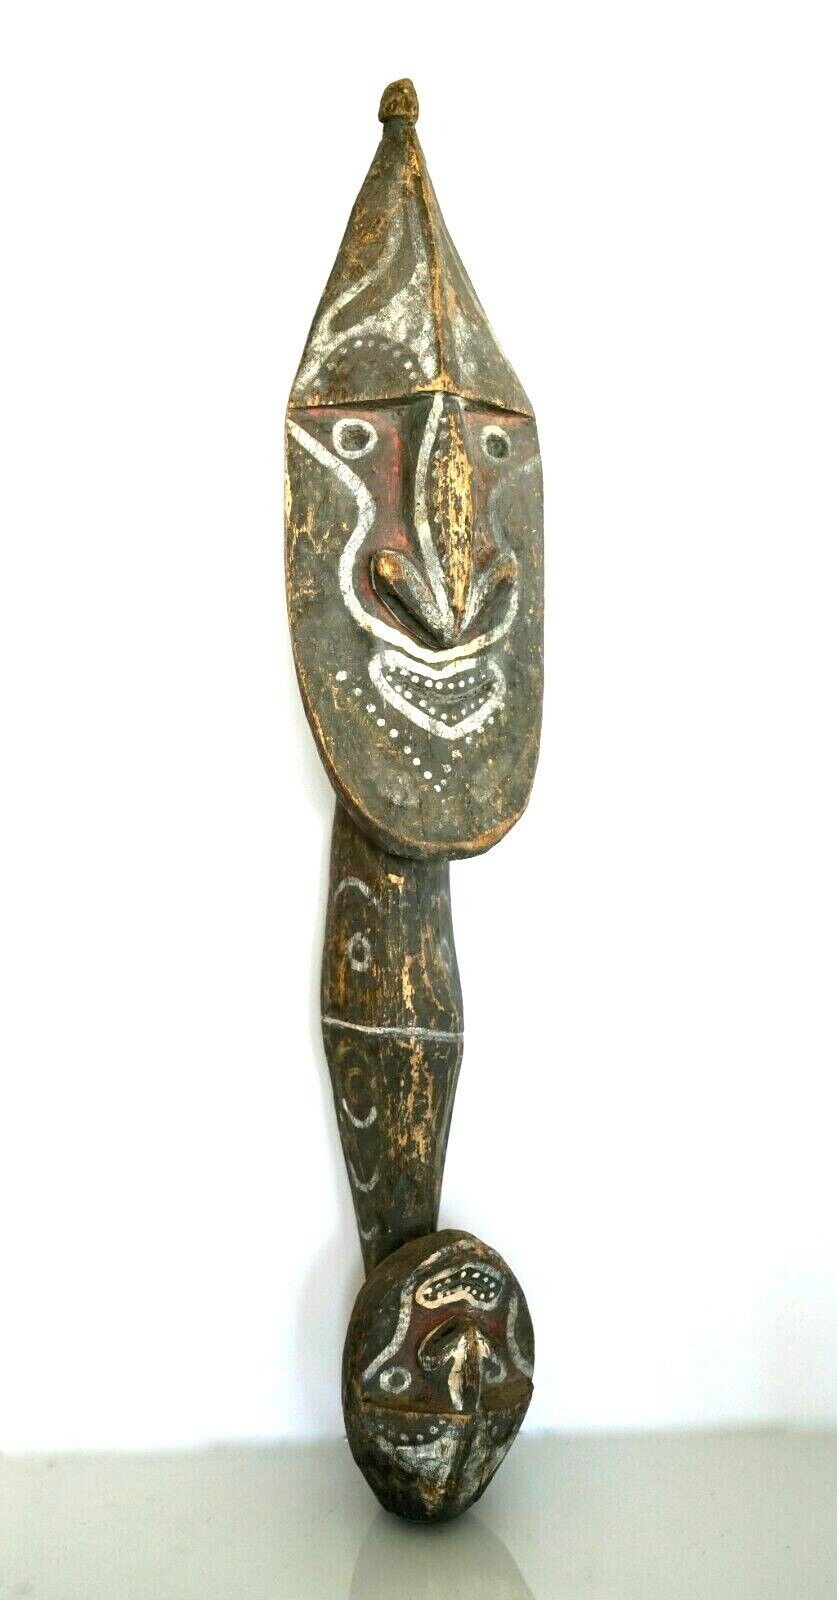 Antique African Tribal Carved Wood Mask Sculpture Two Headed Creature 30\